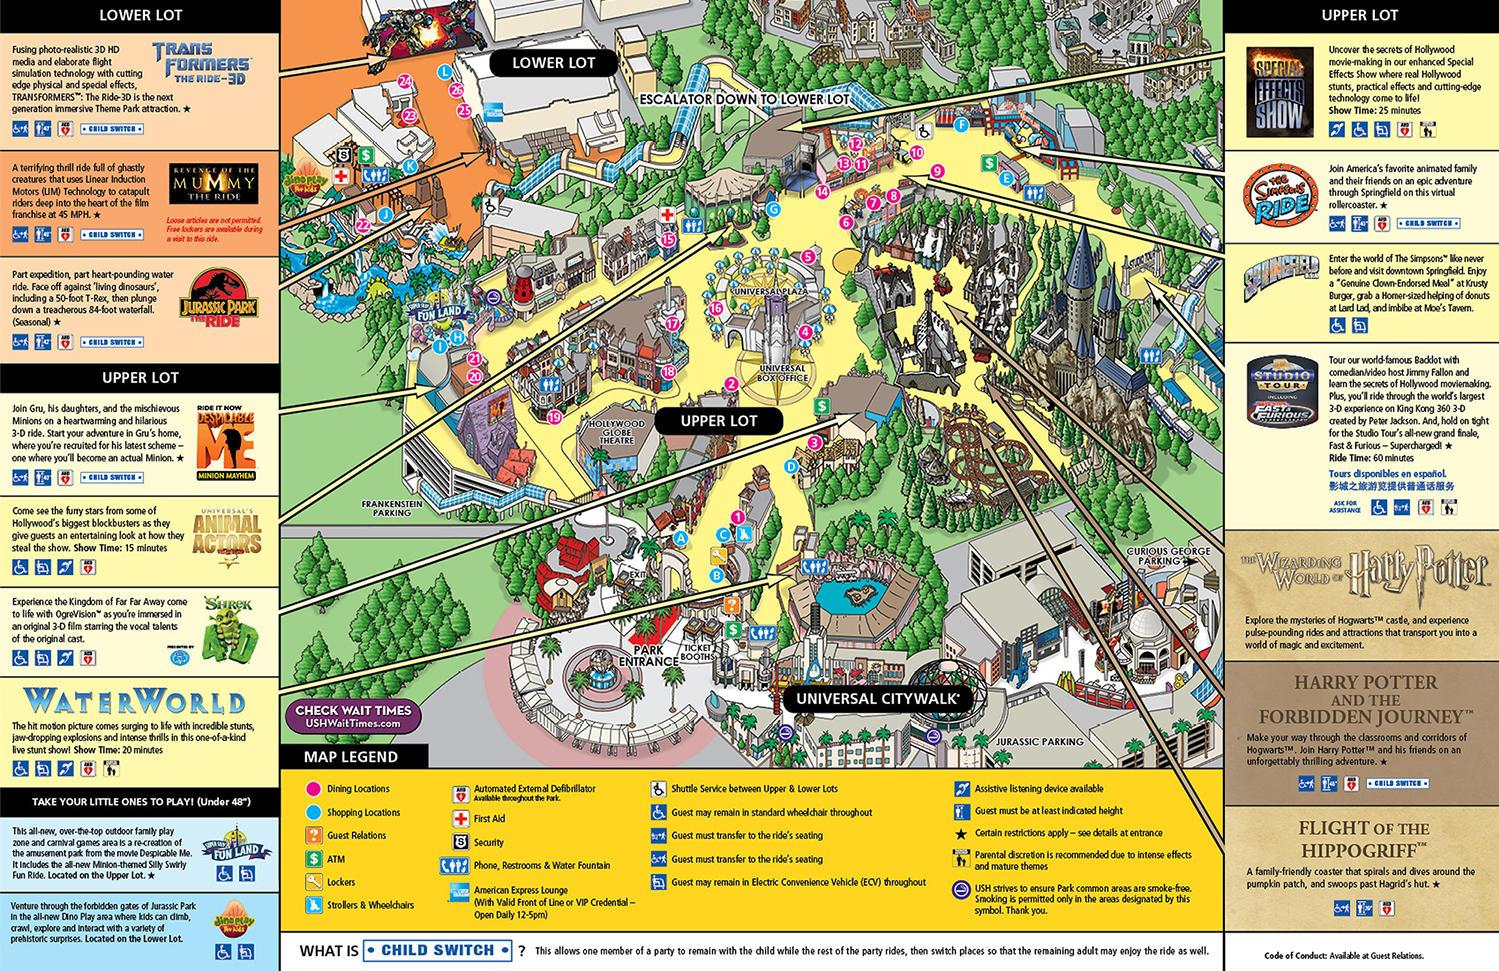 Universal Studios Hollywood General Admission Ticket In Los Angeles - Universal Studios California Map